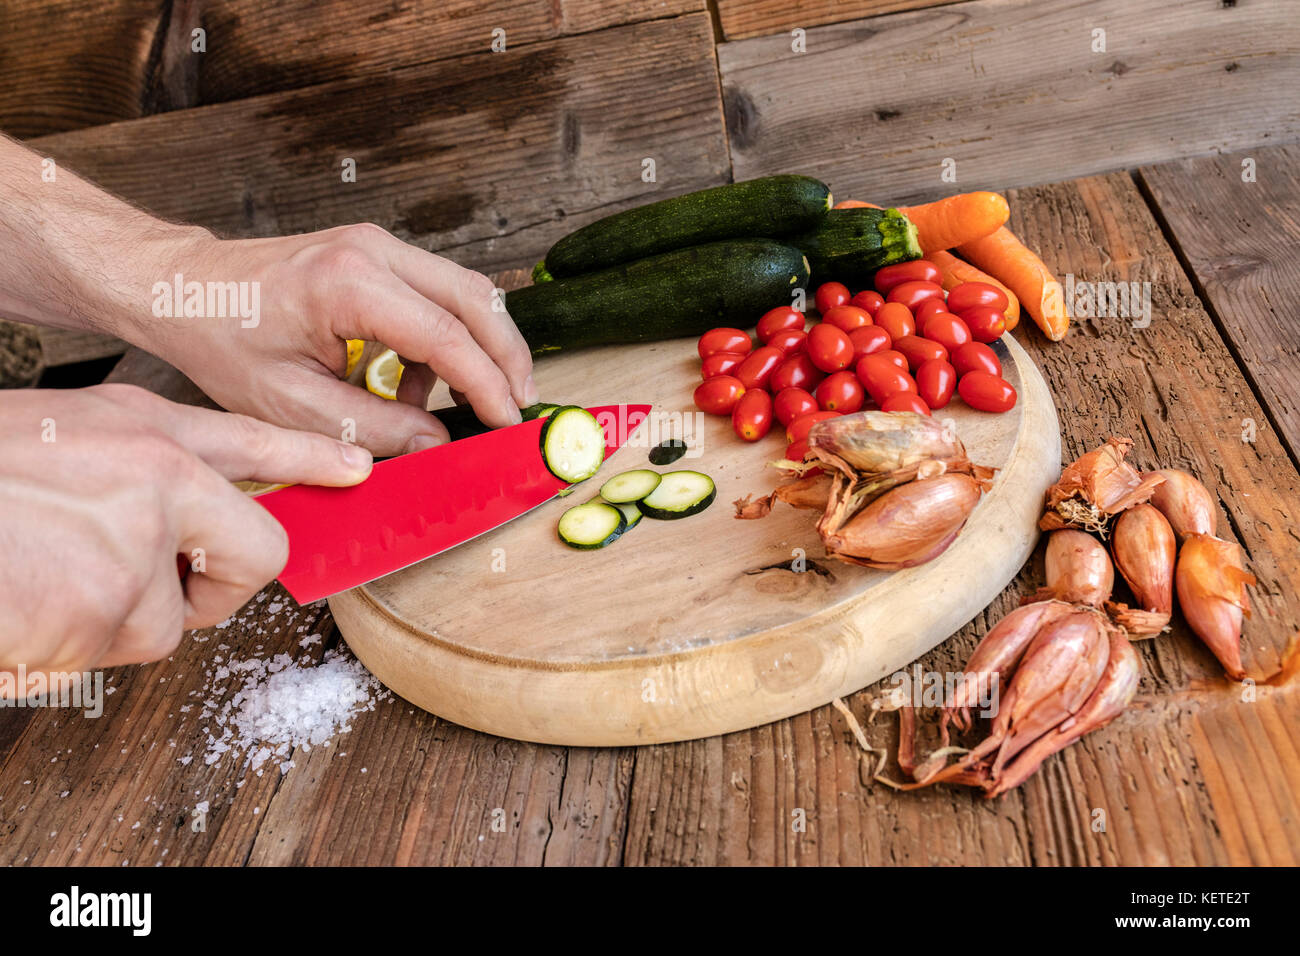 Chef cuts fresh vegetables essential ingredients of typical and healthy Italian cuisine Stock Photo